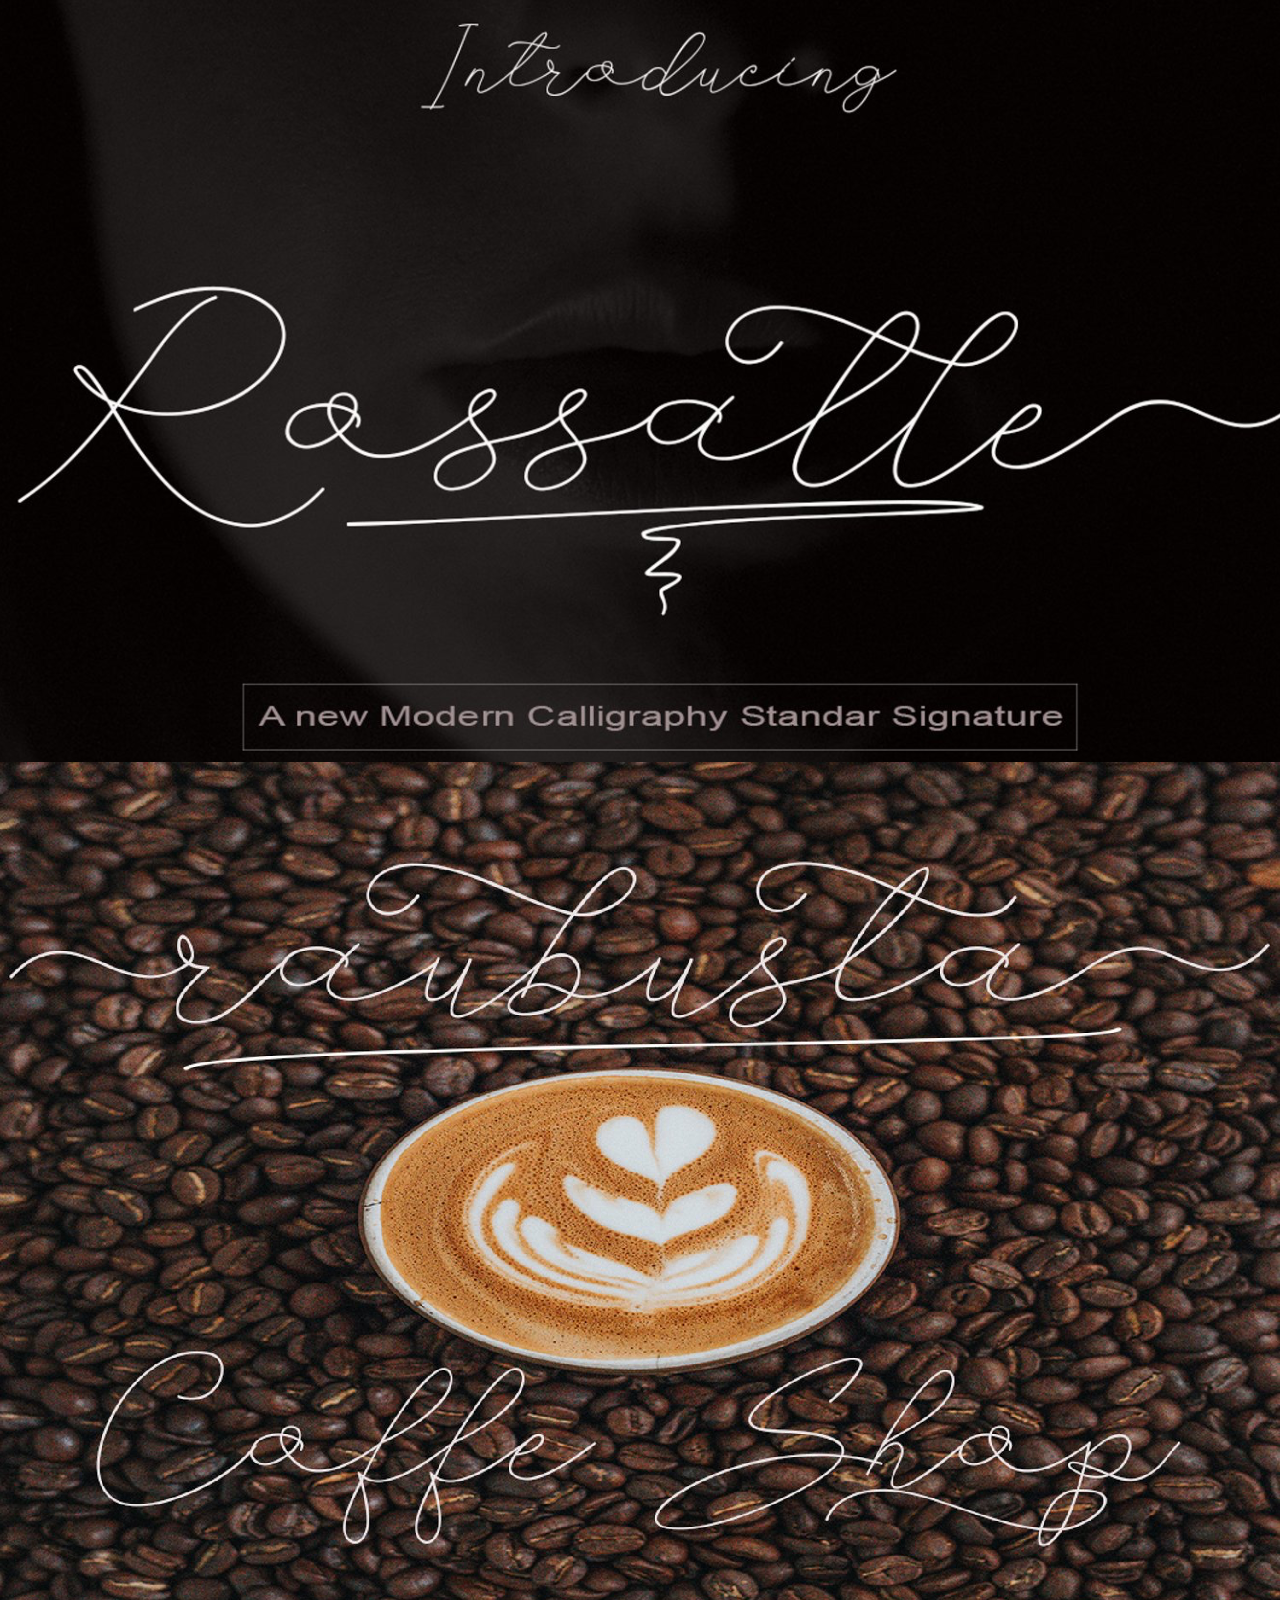 Rossalle font pinterest image preview.